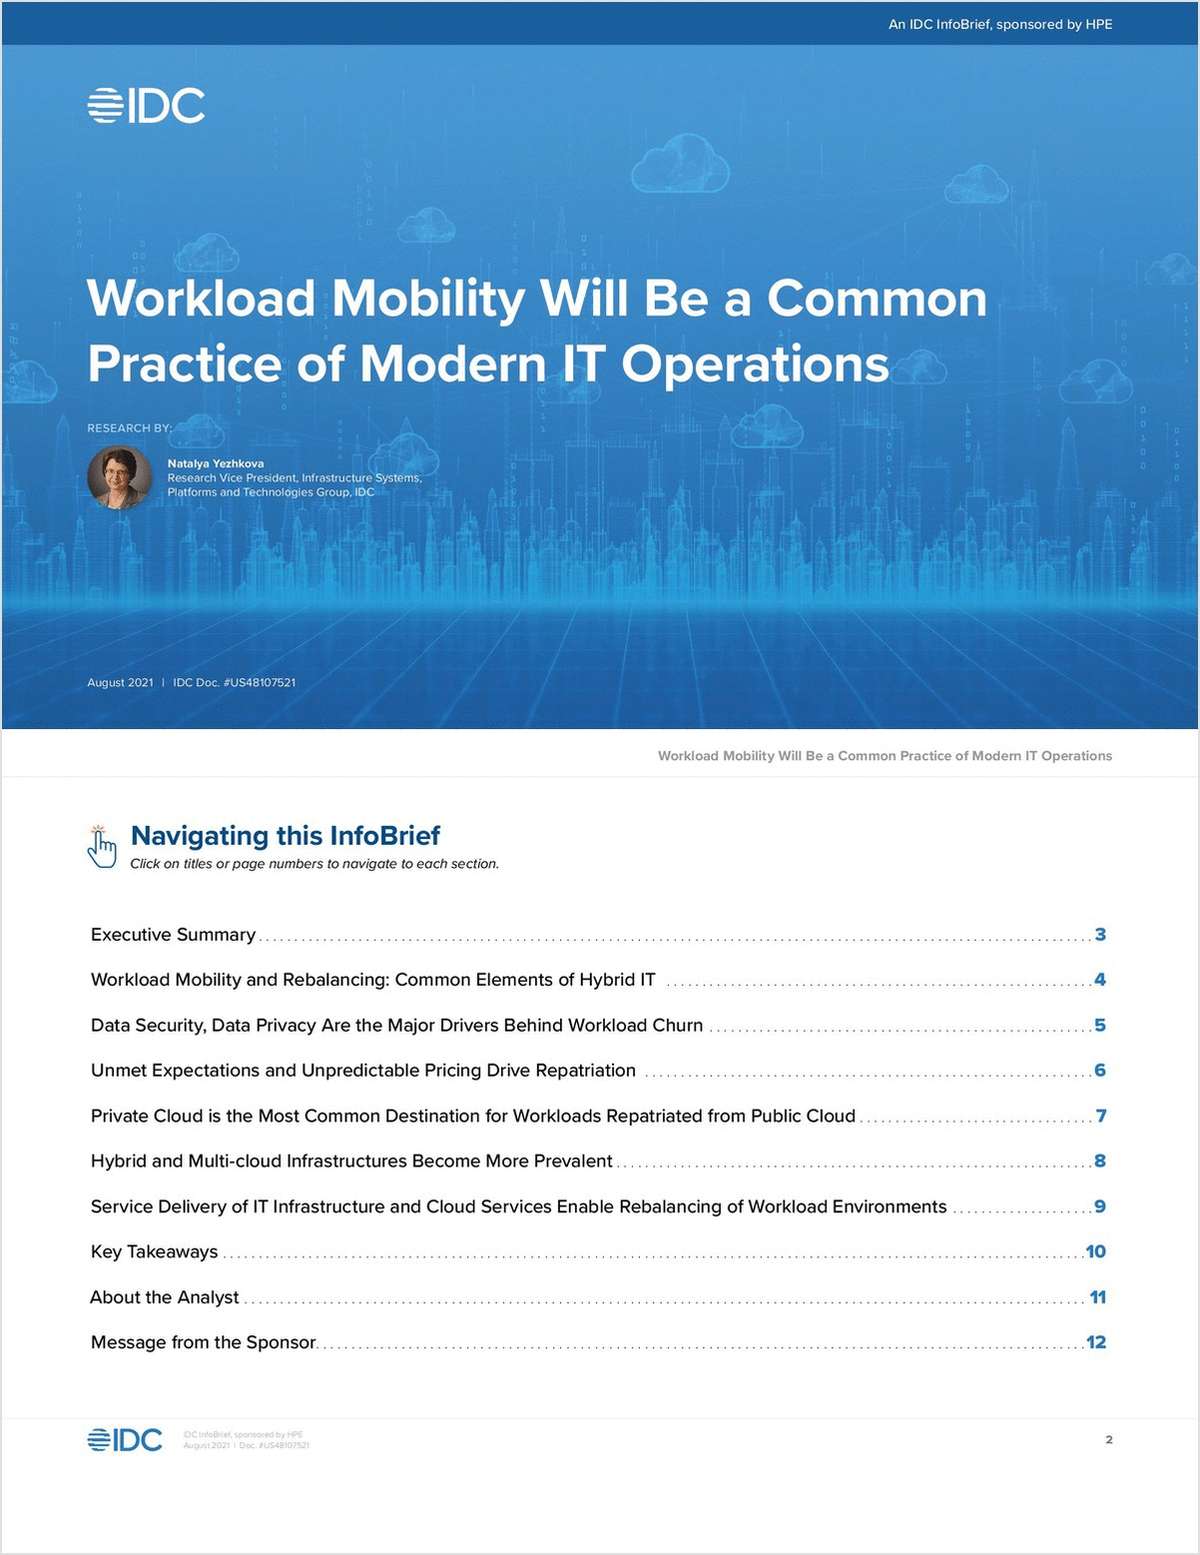 Workload Mobility Will Be a Common Practice of Modern IT Operations